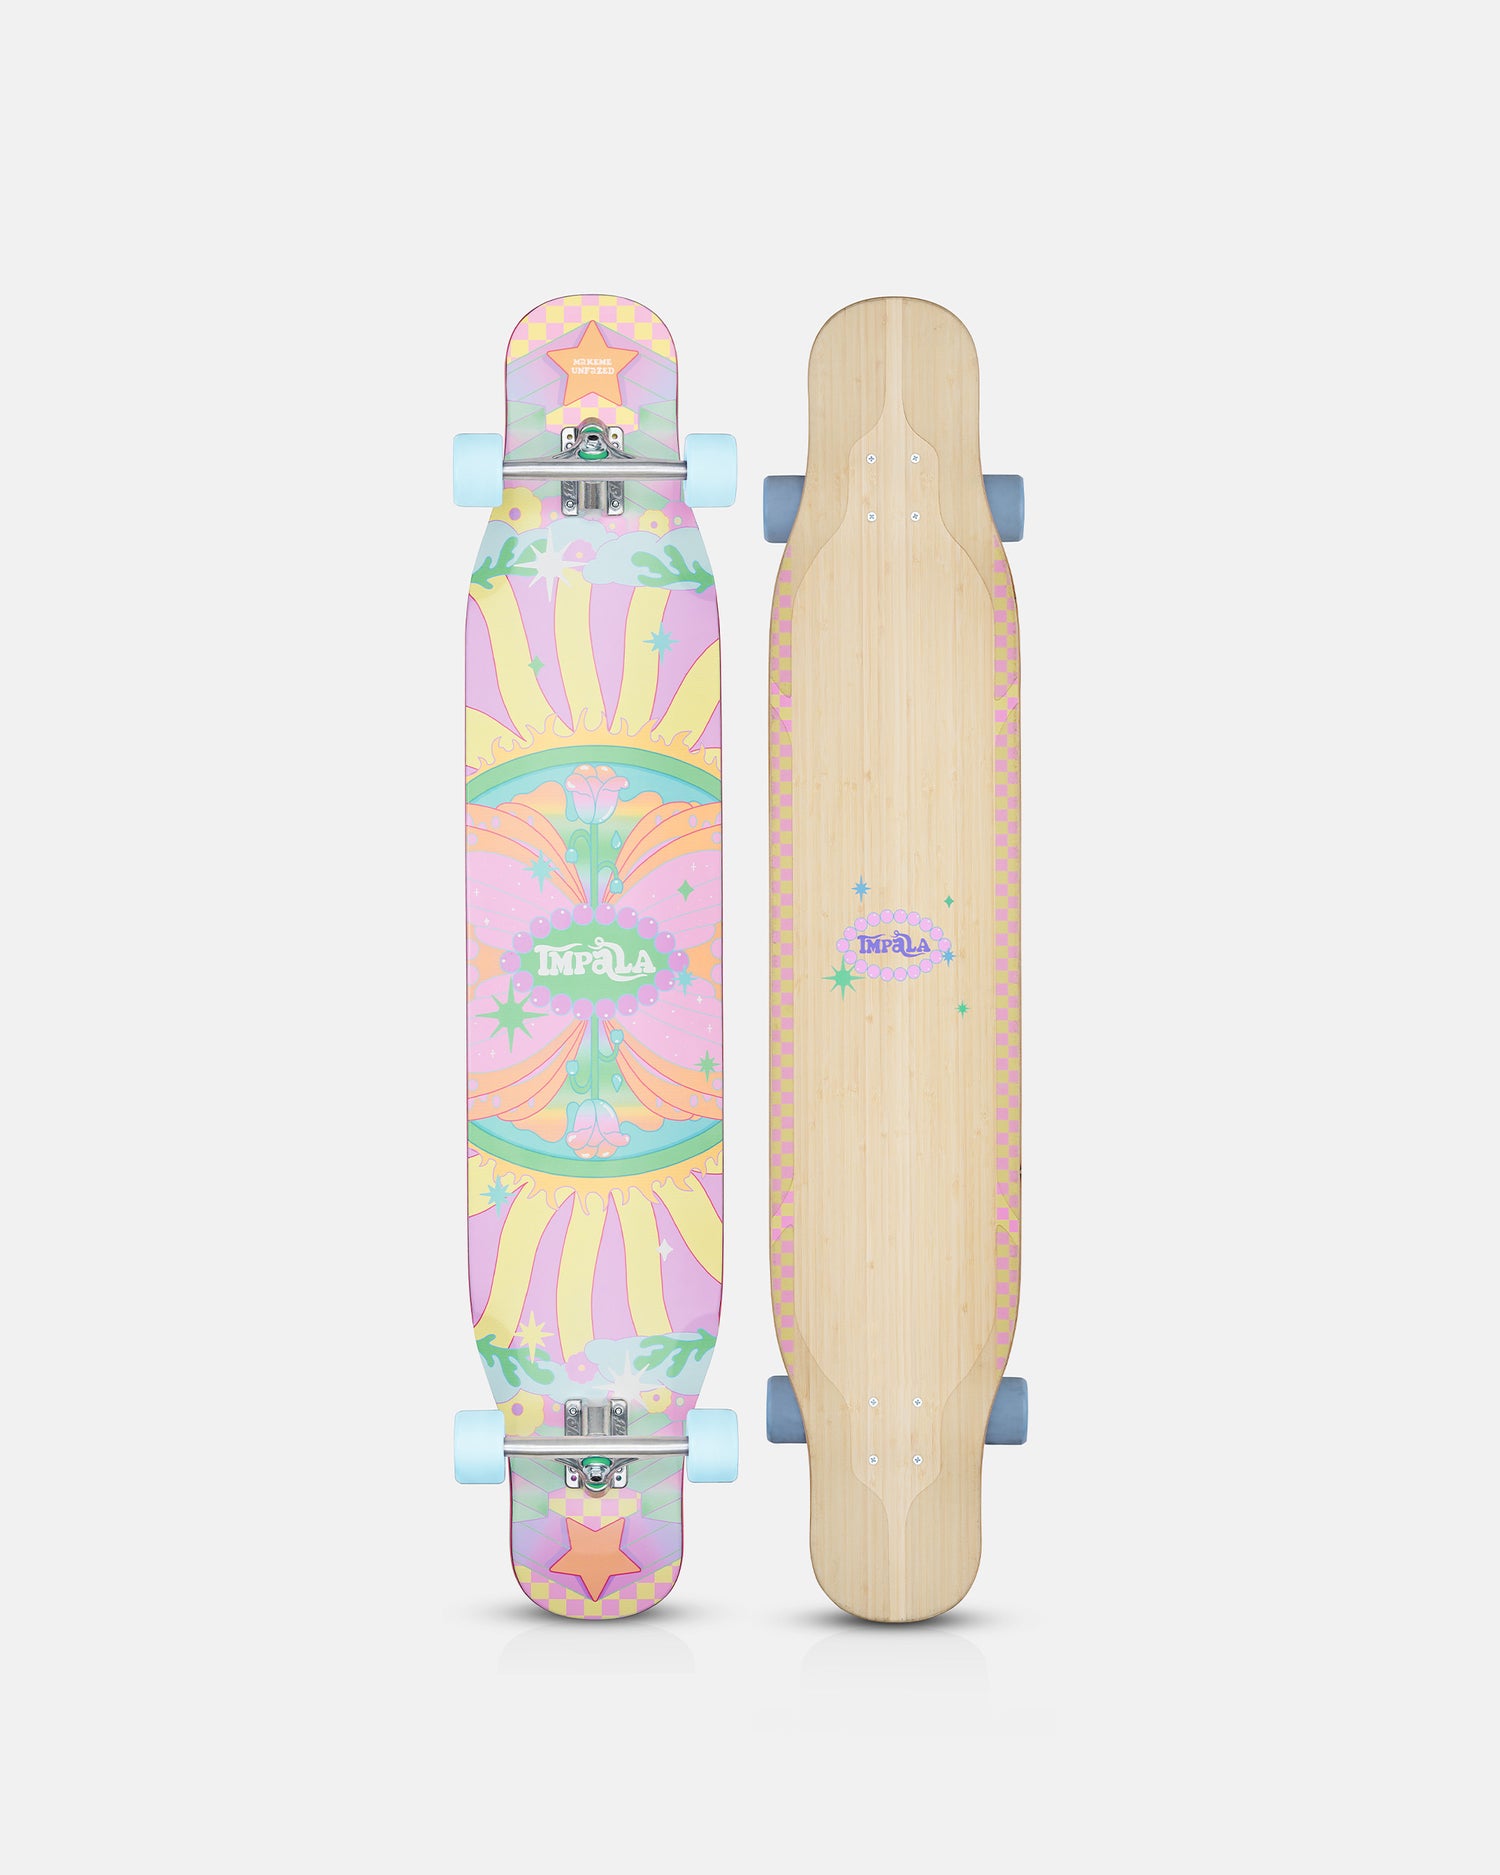 Exclusive Skateboard Collaborations